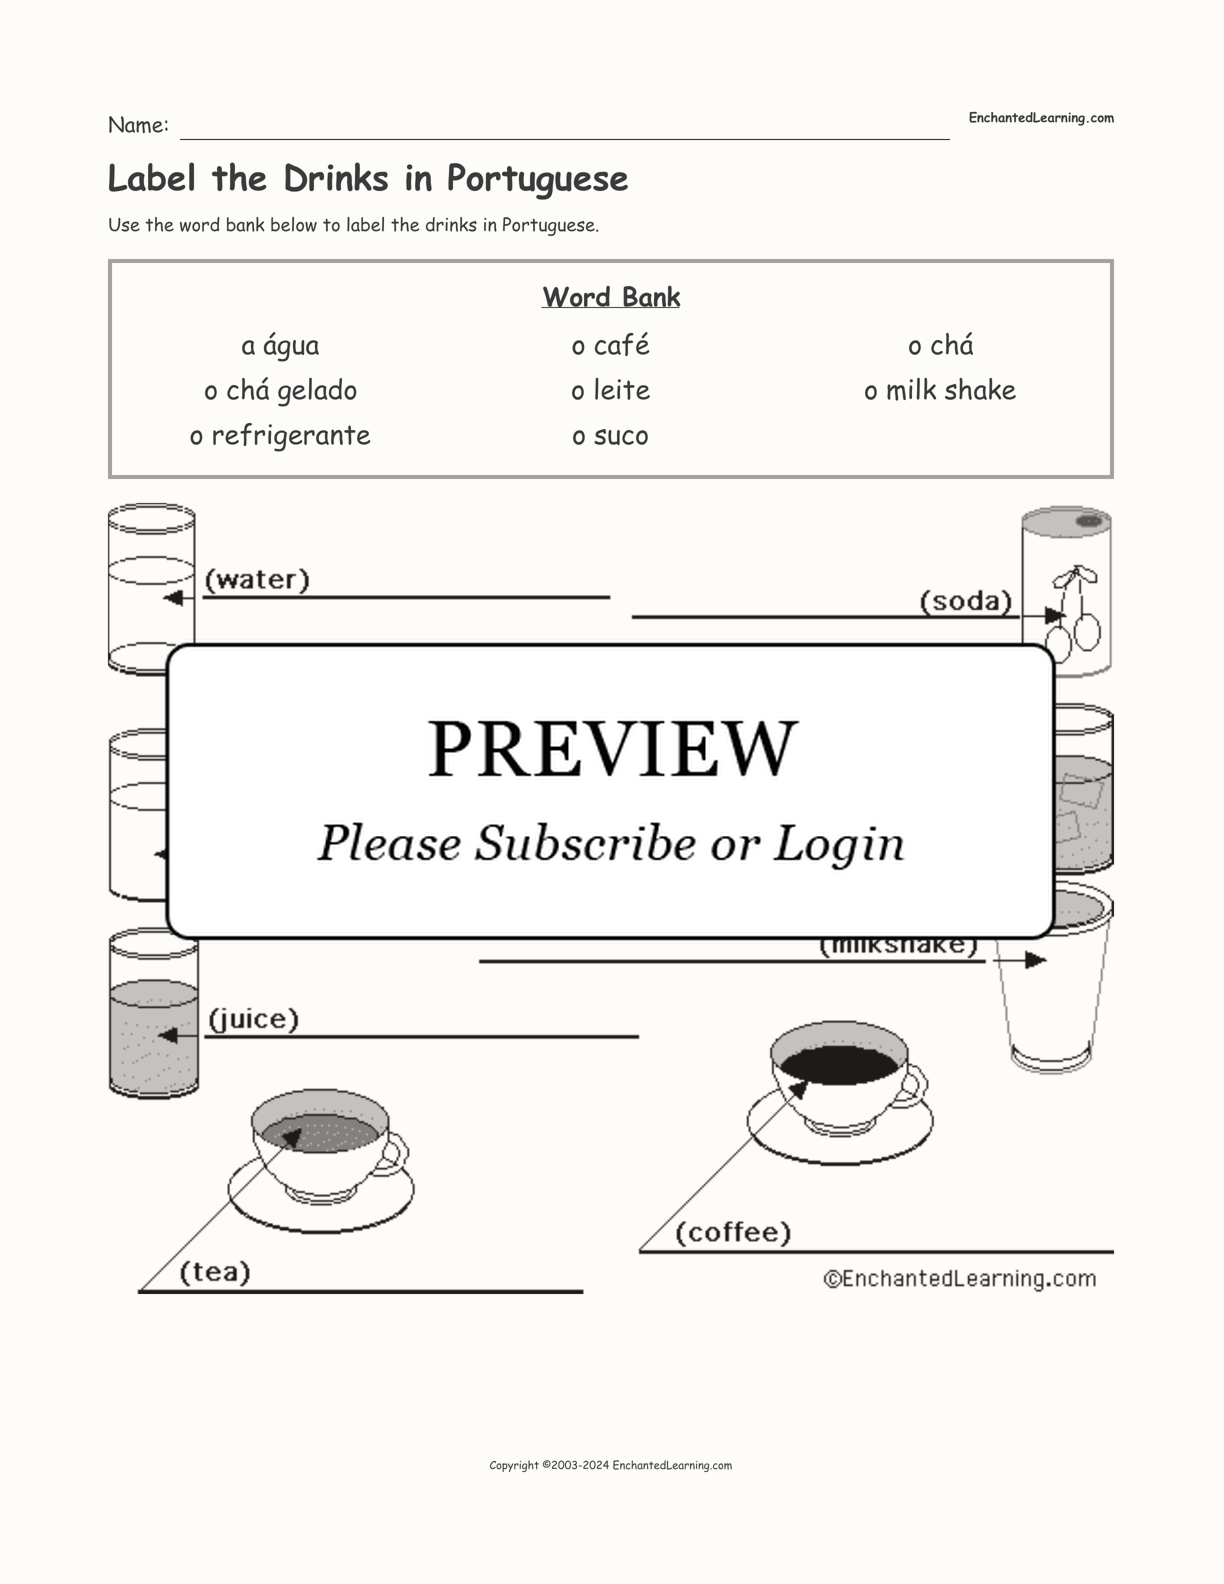 Label the Drinks in Portuguese interactive worksheet page 1